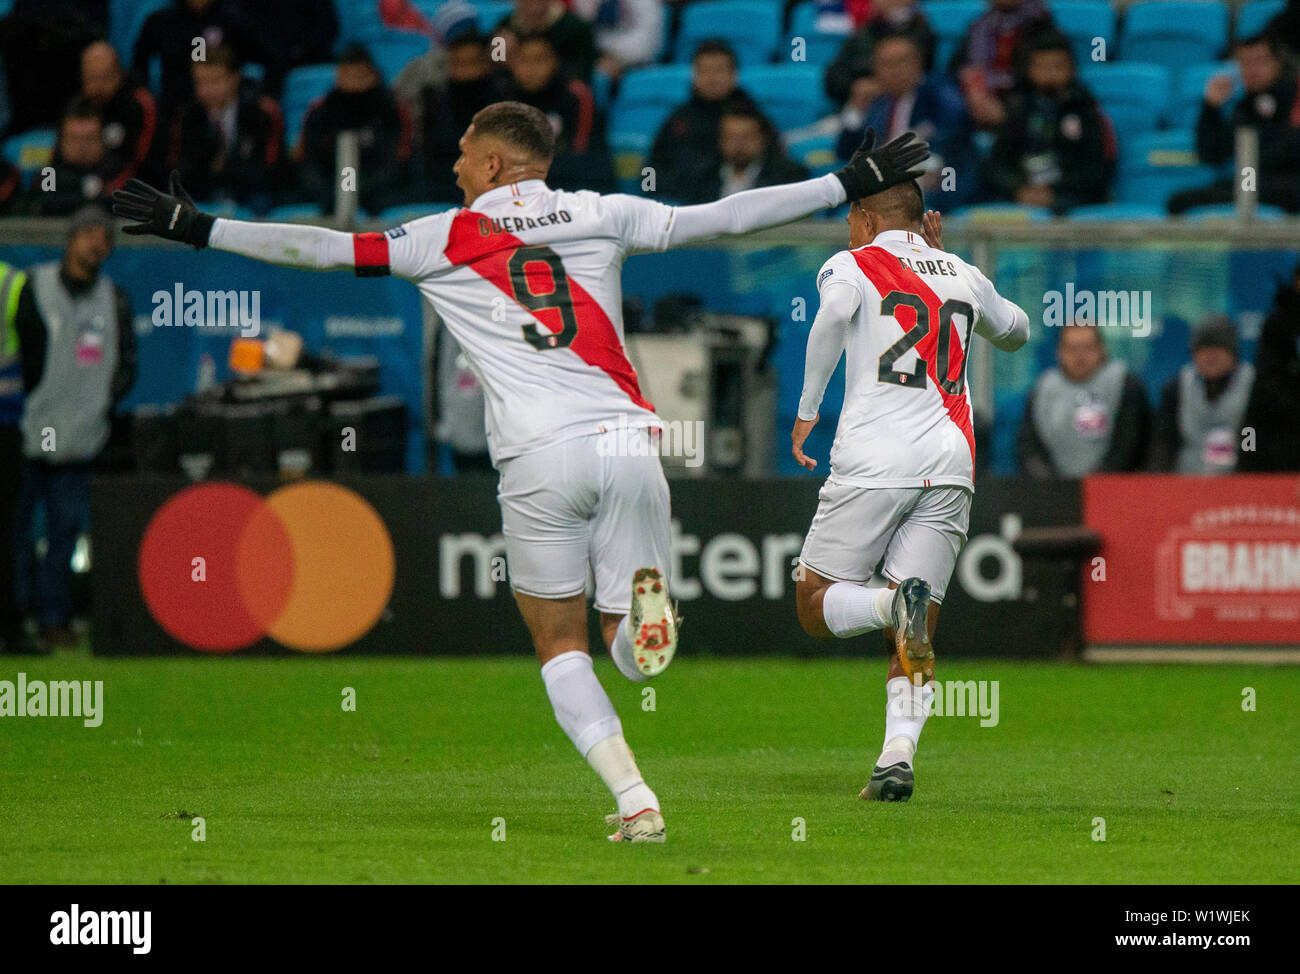 Porto Alegre, Brazil. 03rd July, 2019. Edíson Flores celebrates goal during the match between Chile and Peru, valid for the semifinal of Copa America 2019, held this Wednesday (03) at the Arena of Grêmio, in Porto Alegre, RS. Credit: Raul Pereira/FotoArena/Alamy Live News Stock Photo